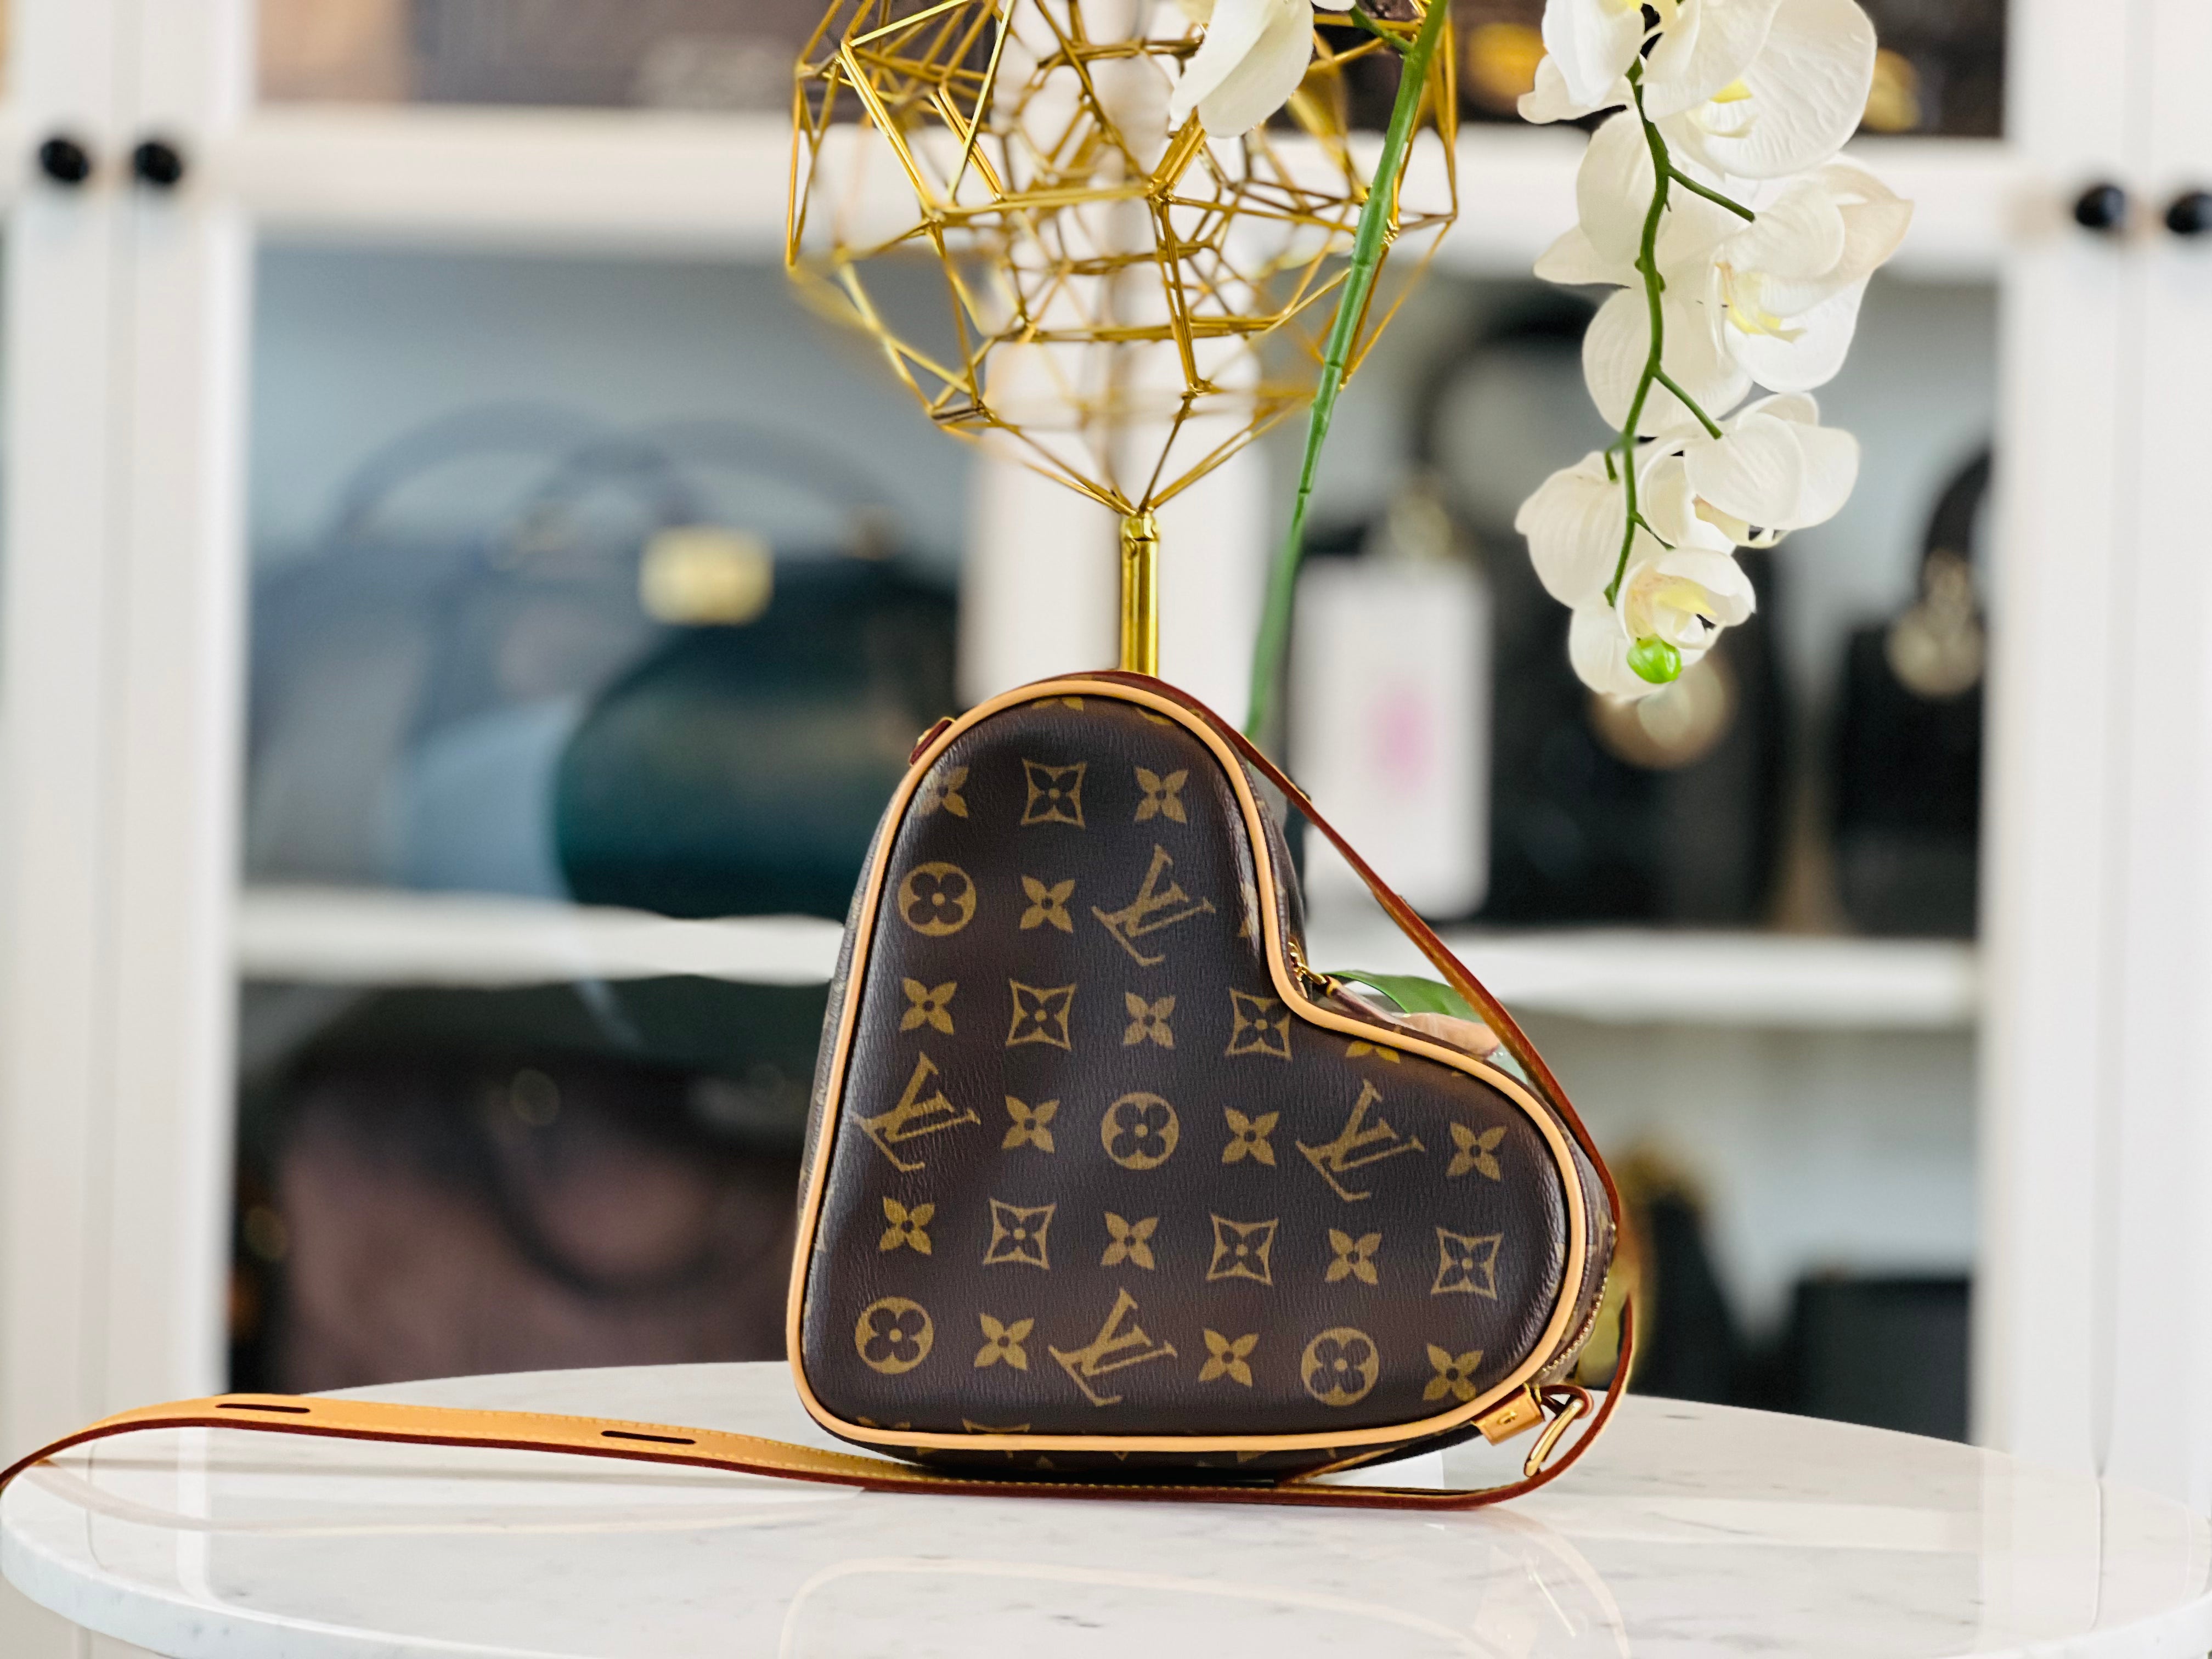 Unboxing Coeur, Heart Bag, Louis Vuitton, Hard to find Item